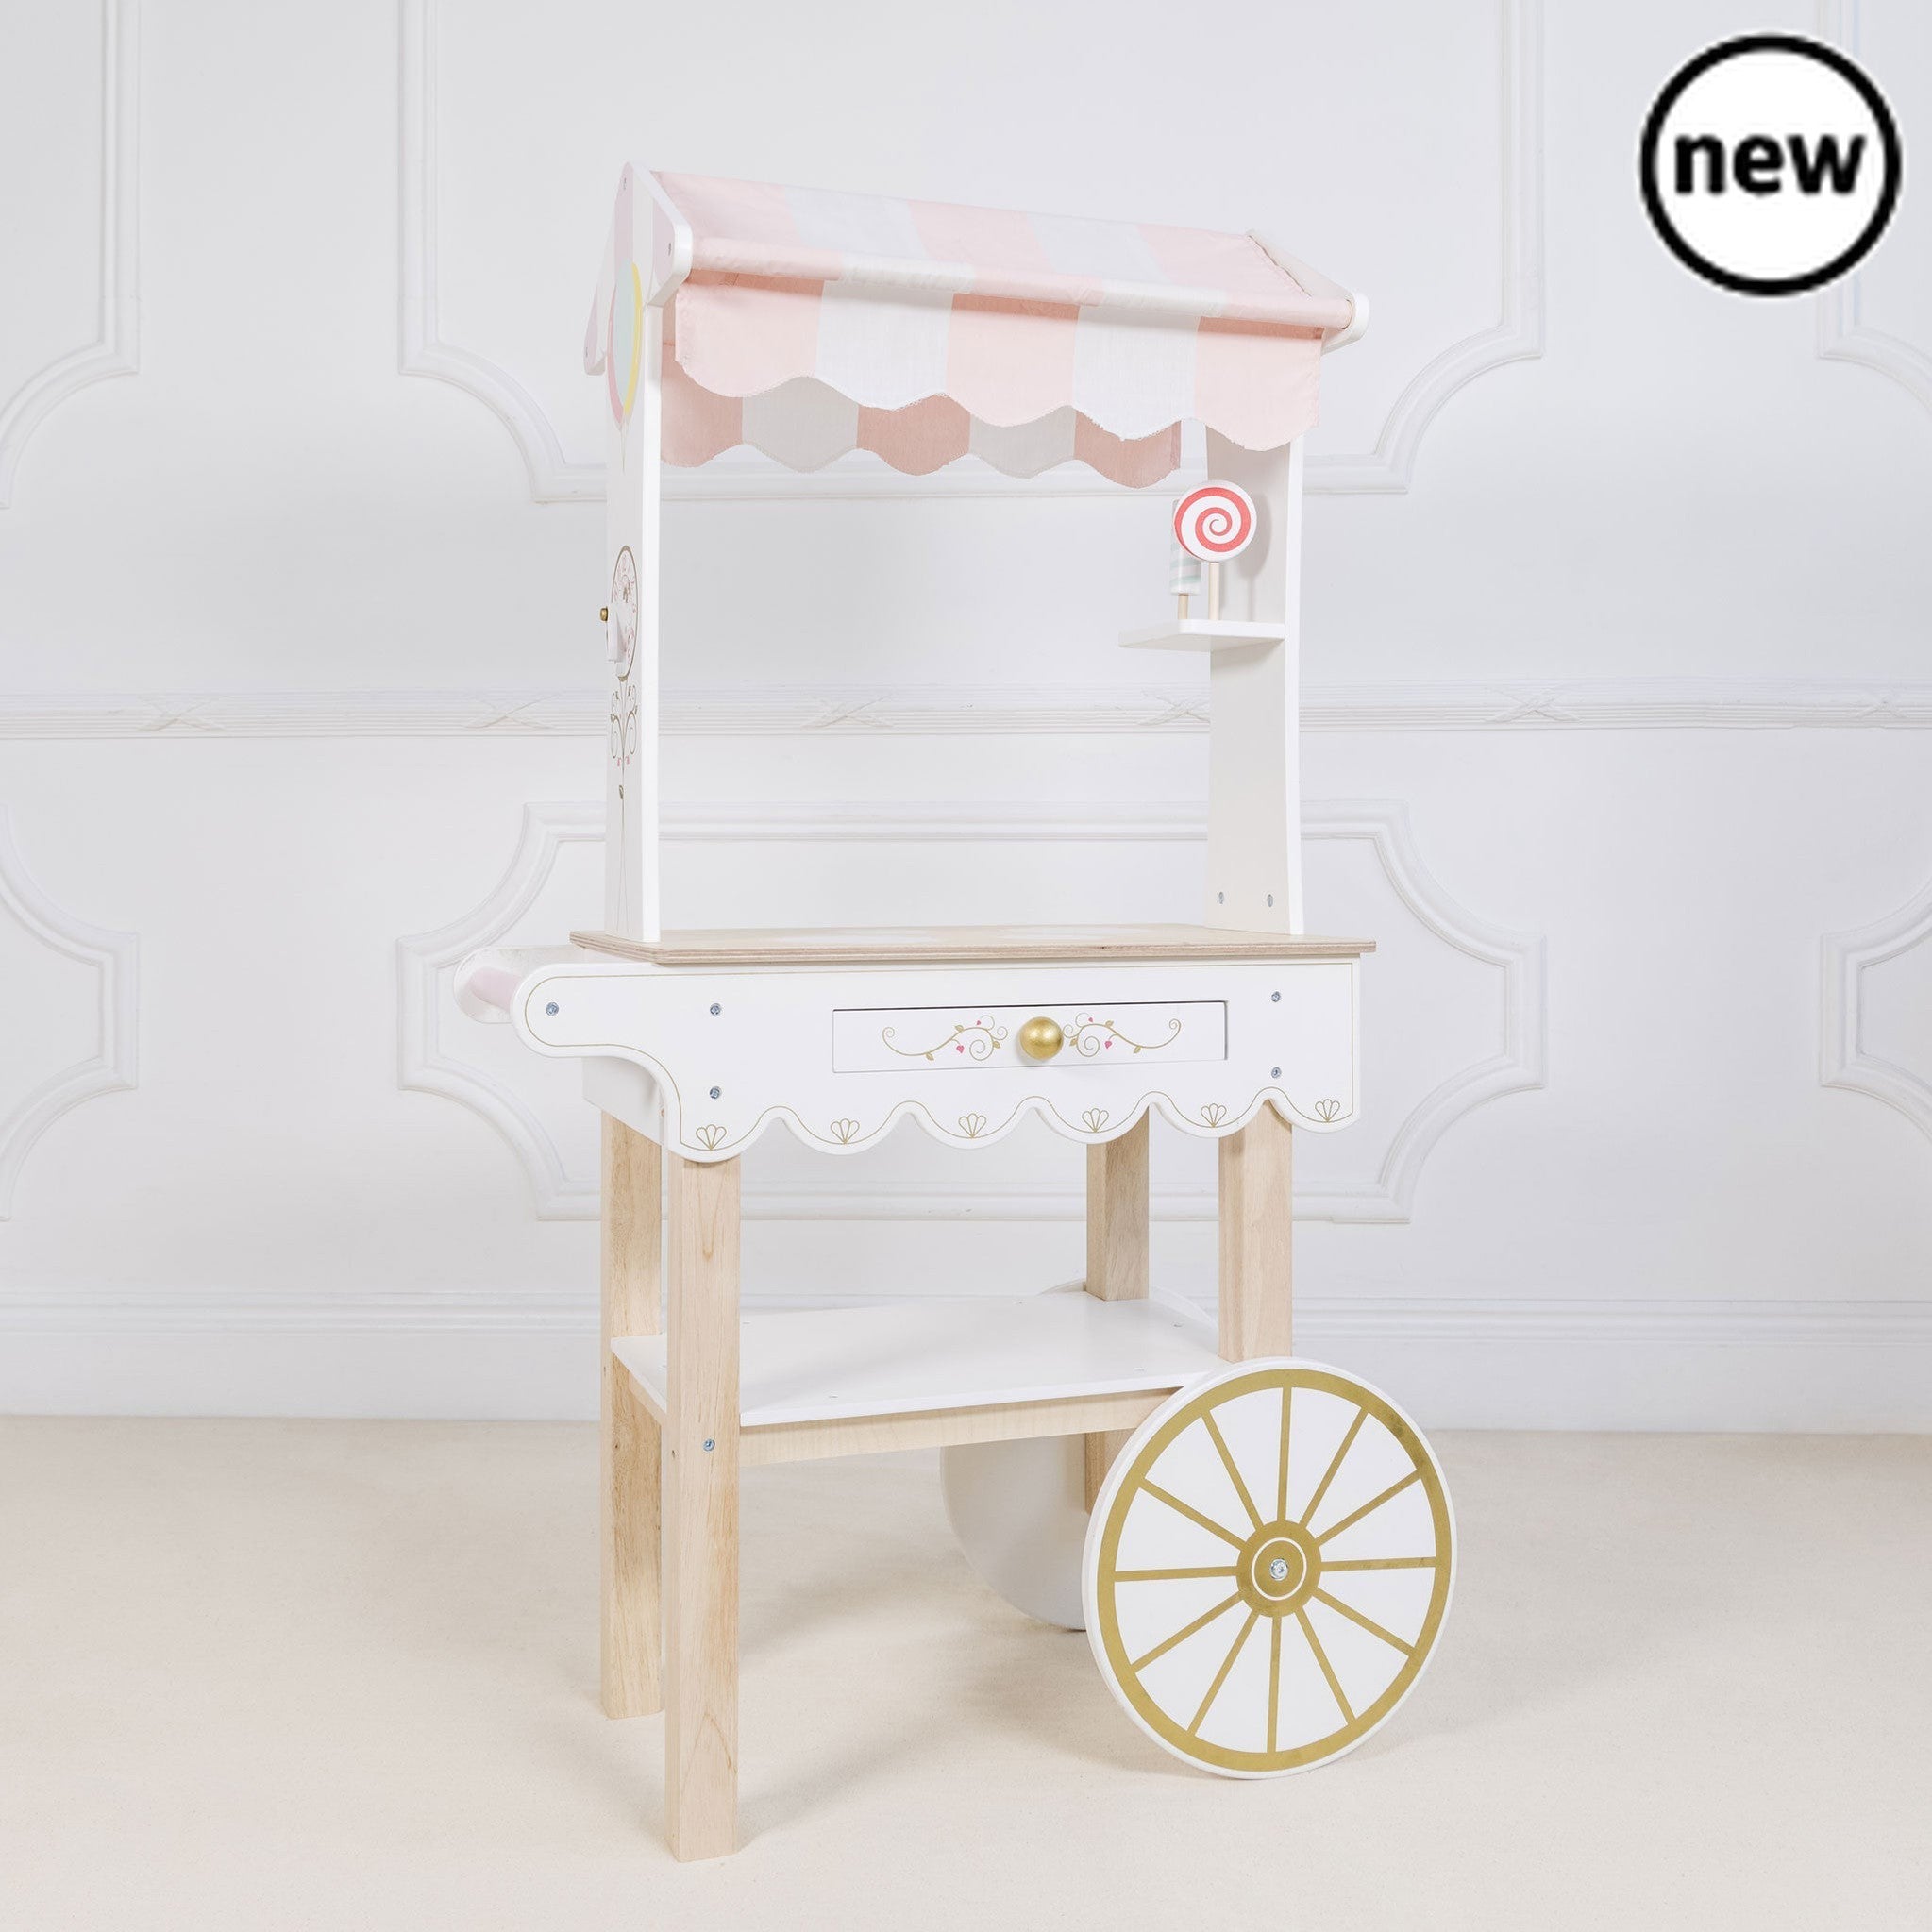 Tea & Treats Trolley, Description Time for Tea! This barrow style tea and treats trolley is a real head turner. It's stunning vintage style design makes it a real showstopper and a truly magical gift to treasure. The traditional candy striped fabric canopy really sets off this beautiful wooden toy. Complete with a secret drawer ,this classic trolley features two wheels and a handle for wheelie good fun. Adorned with delightful illustrations and a cake and beverage menu on both side panels. Painted in child 